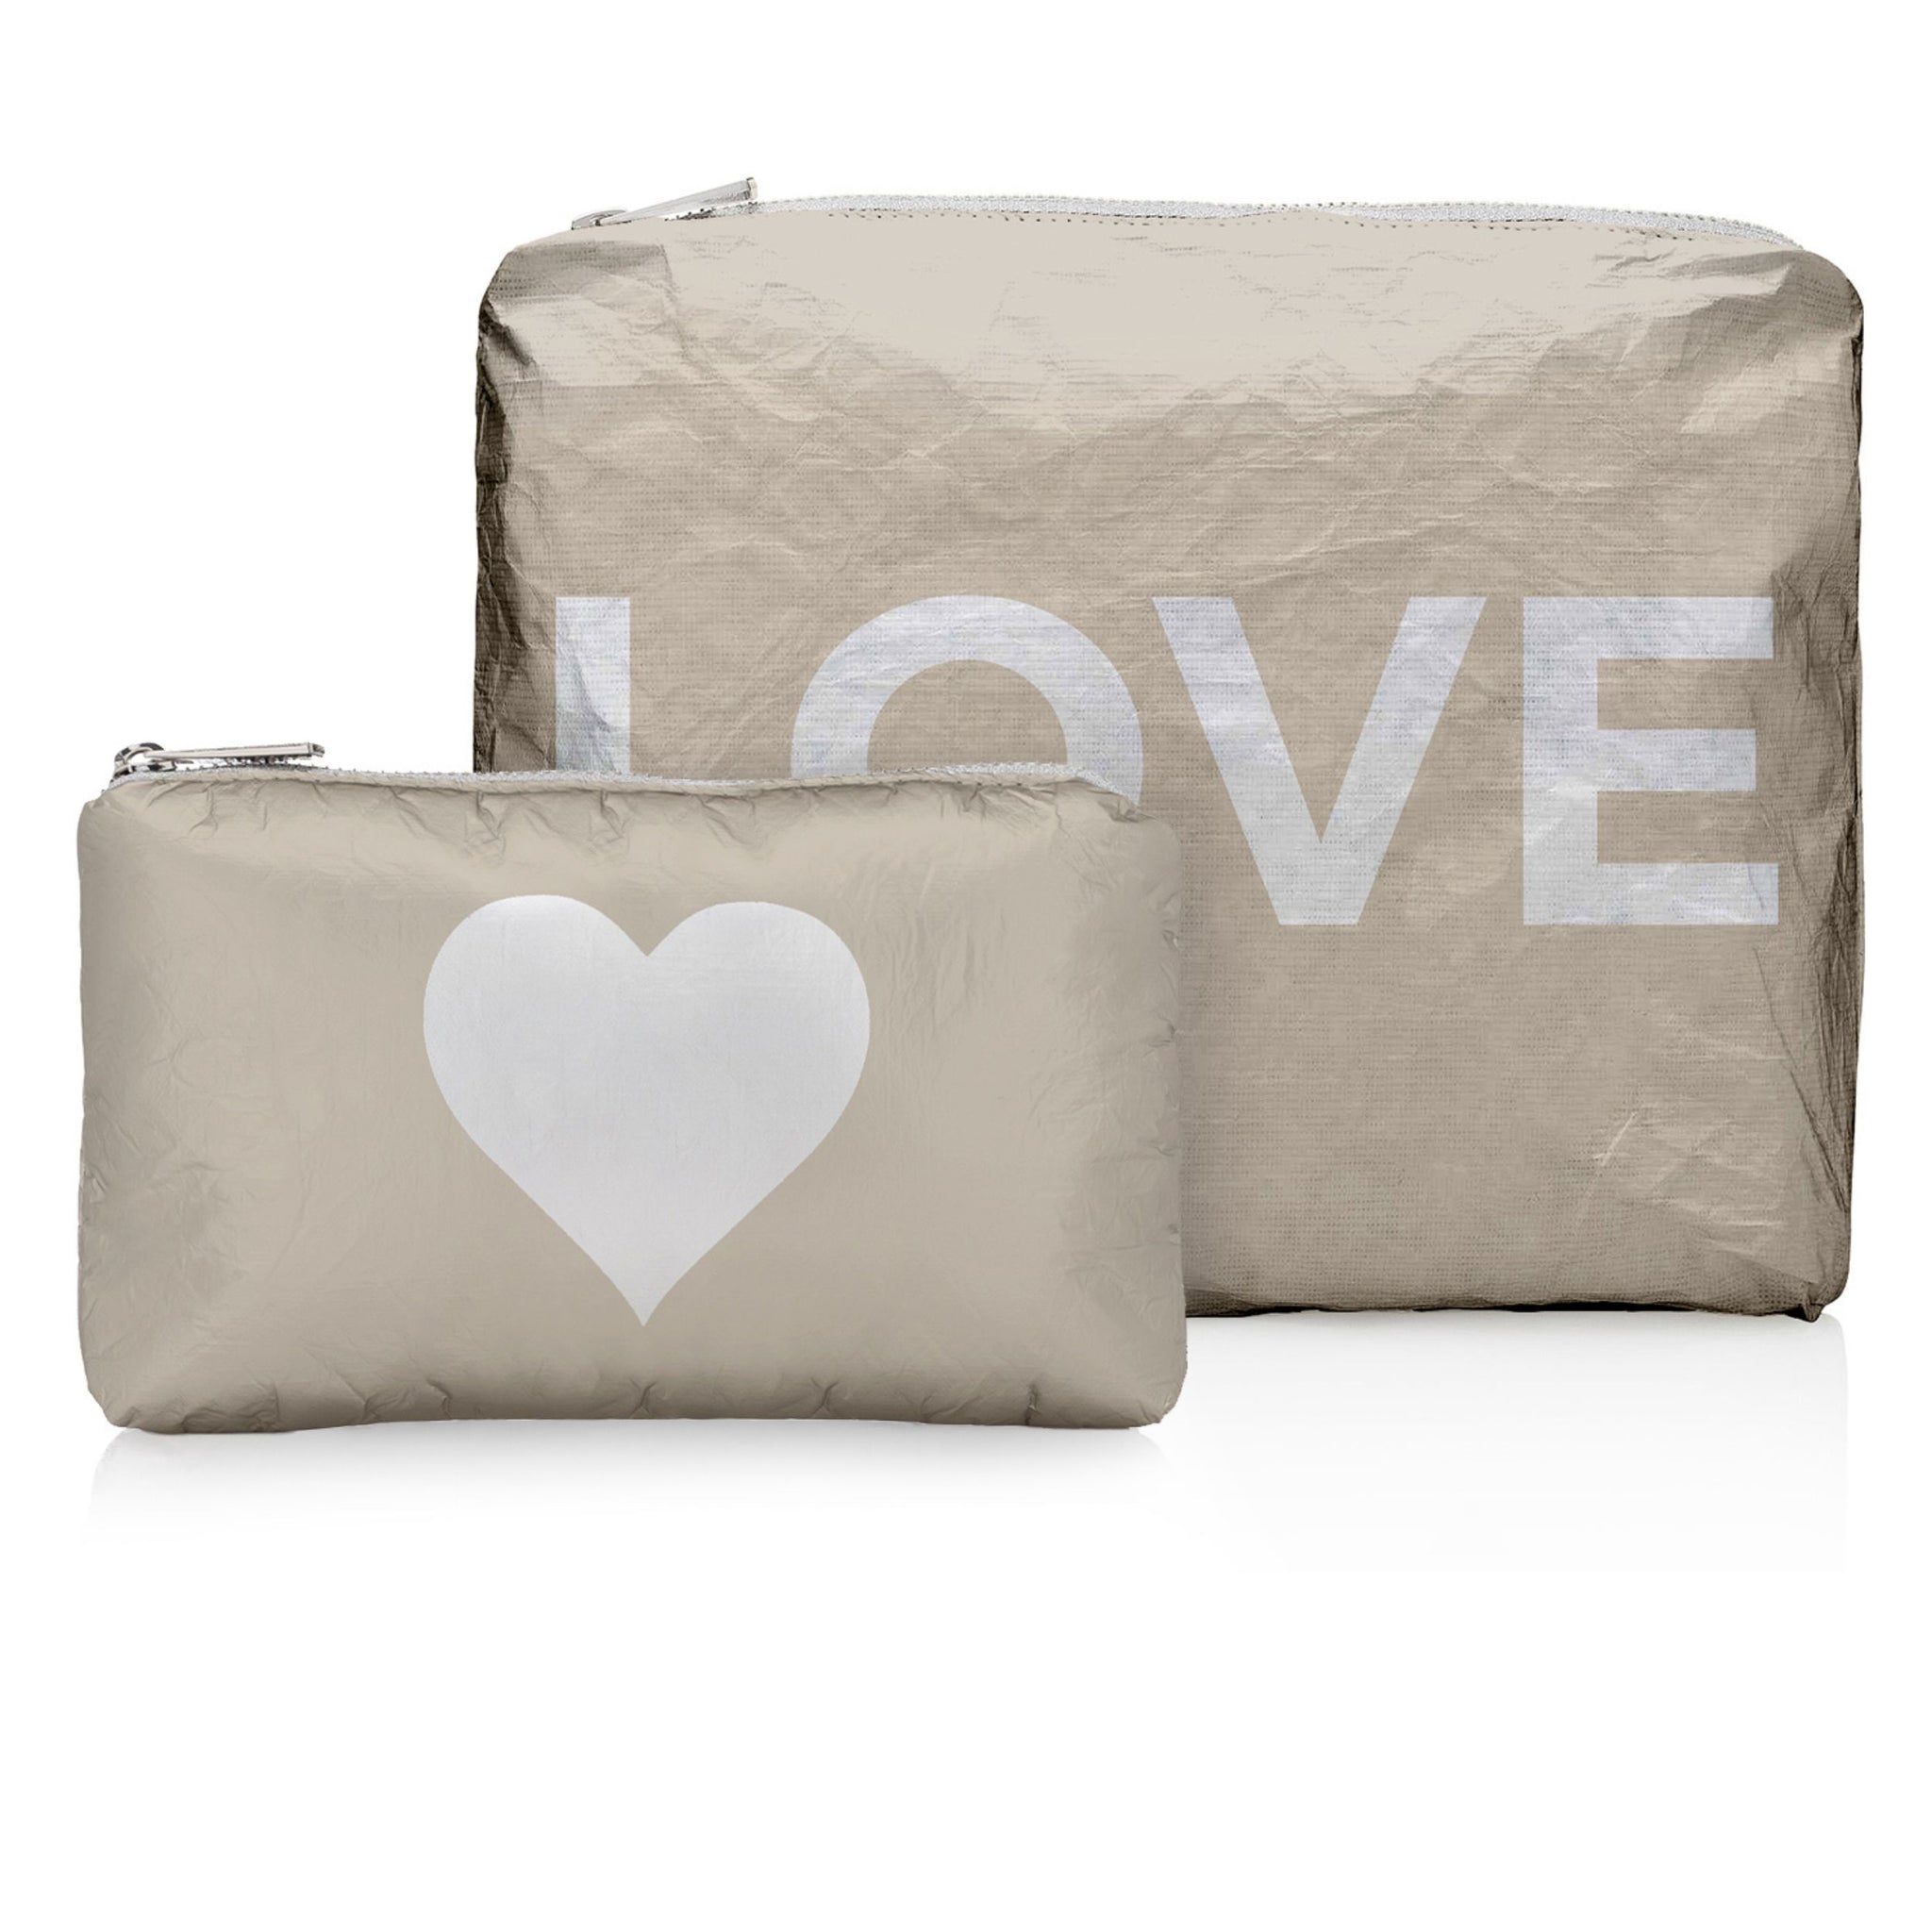 Set of Two - Organizational Packs - Golden Shimmer Beige with "LOVE" & Heart